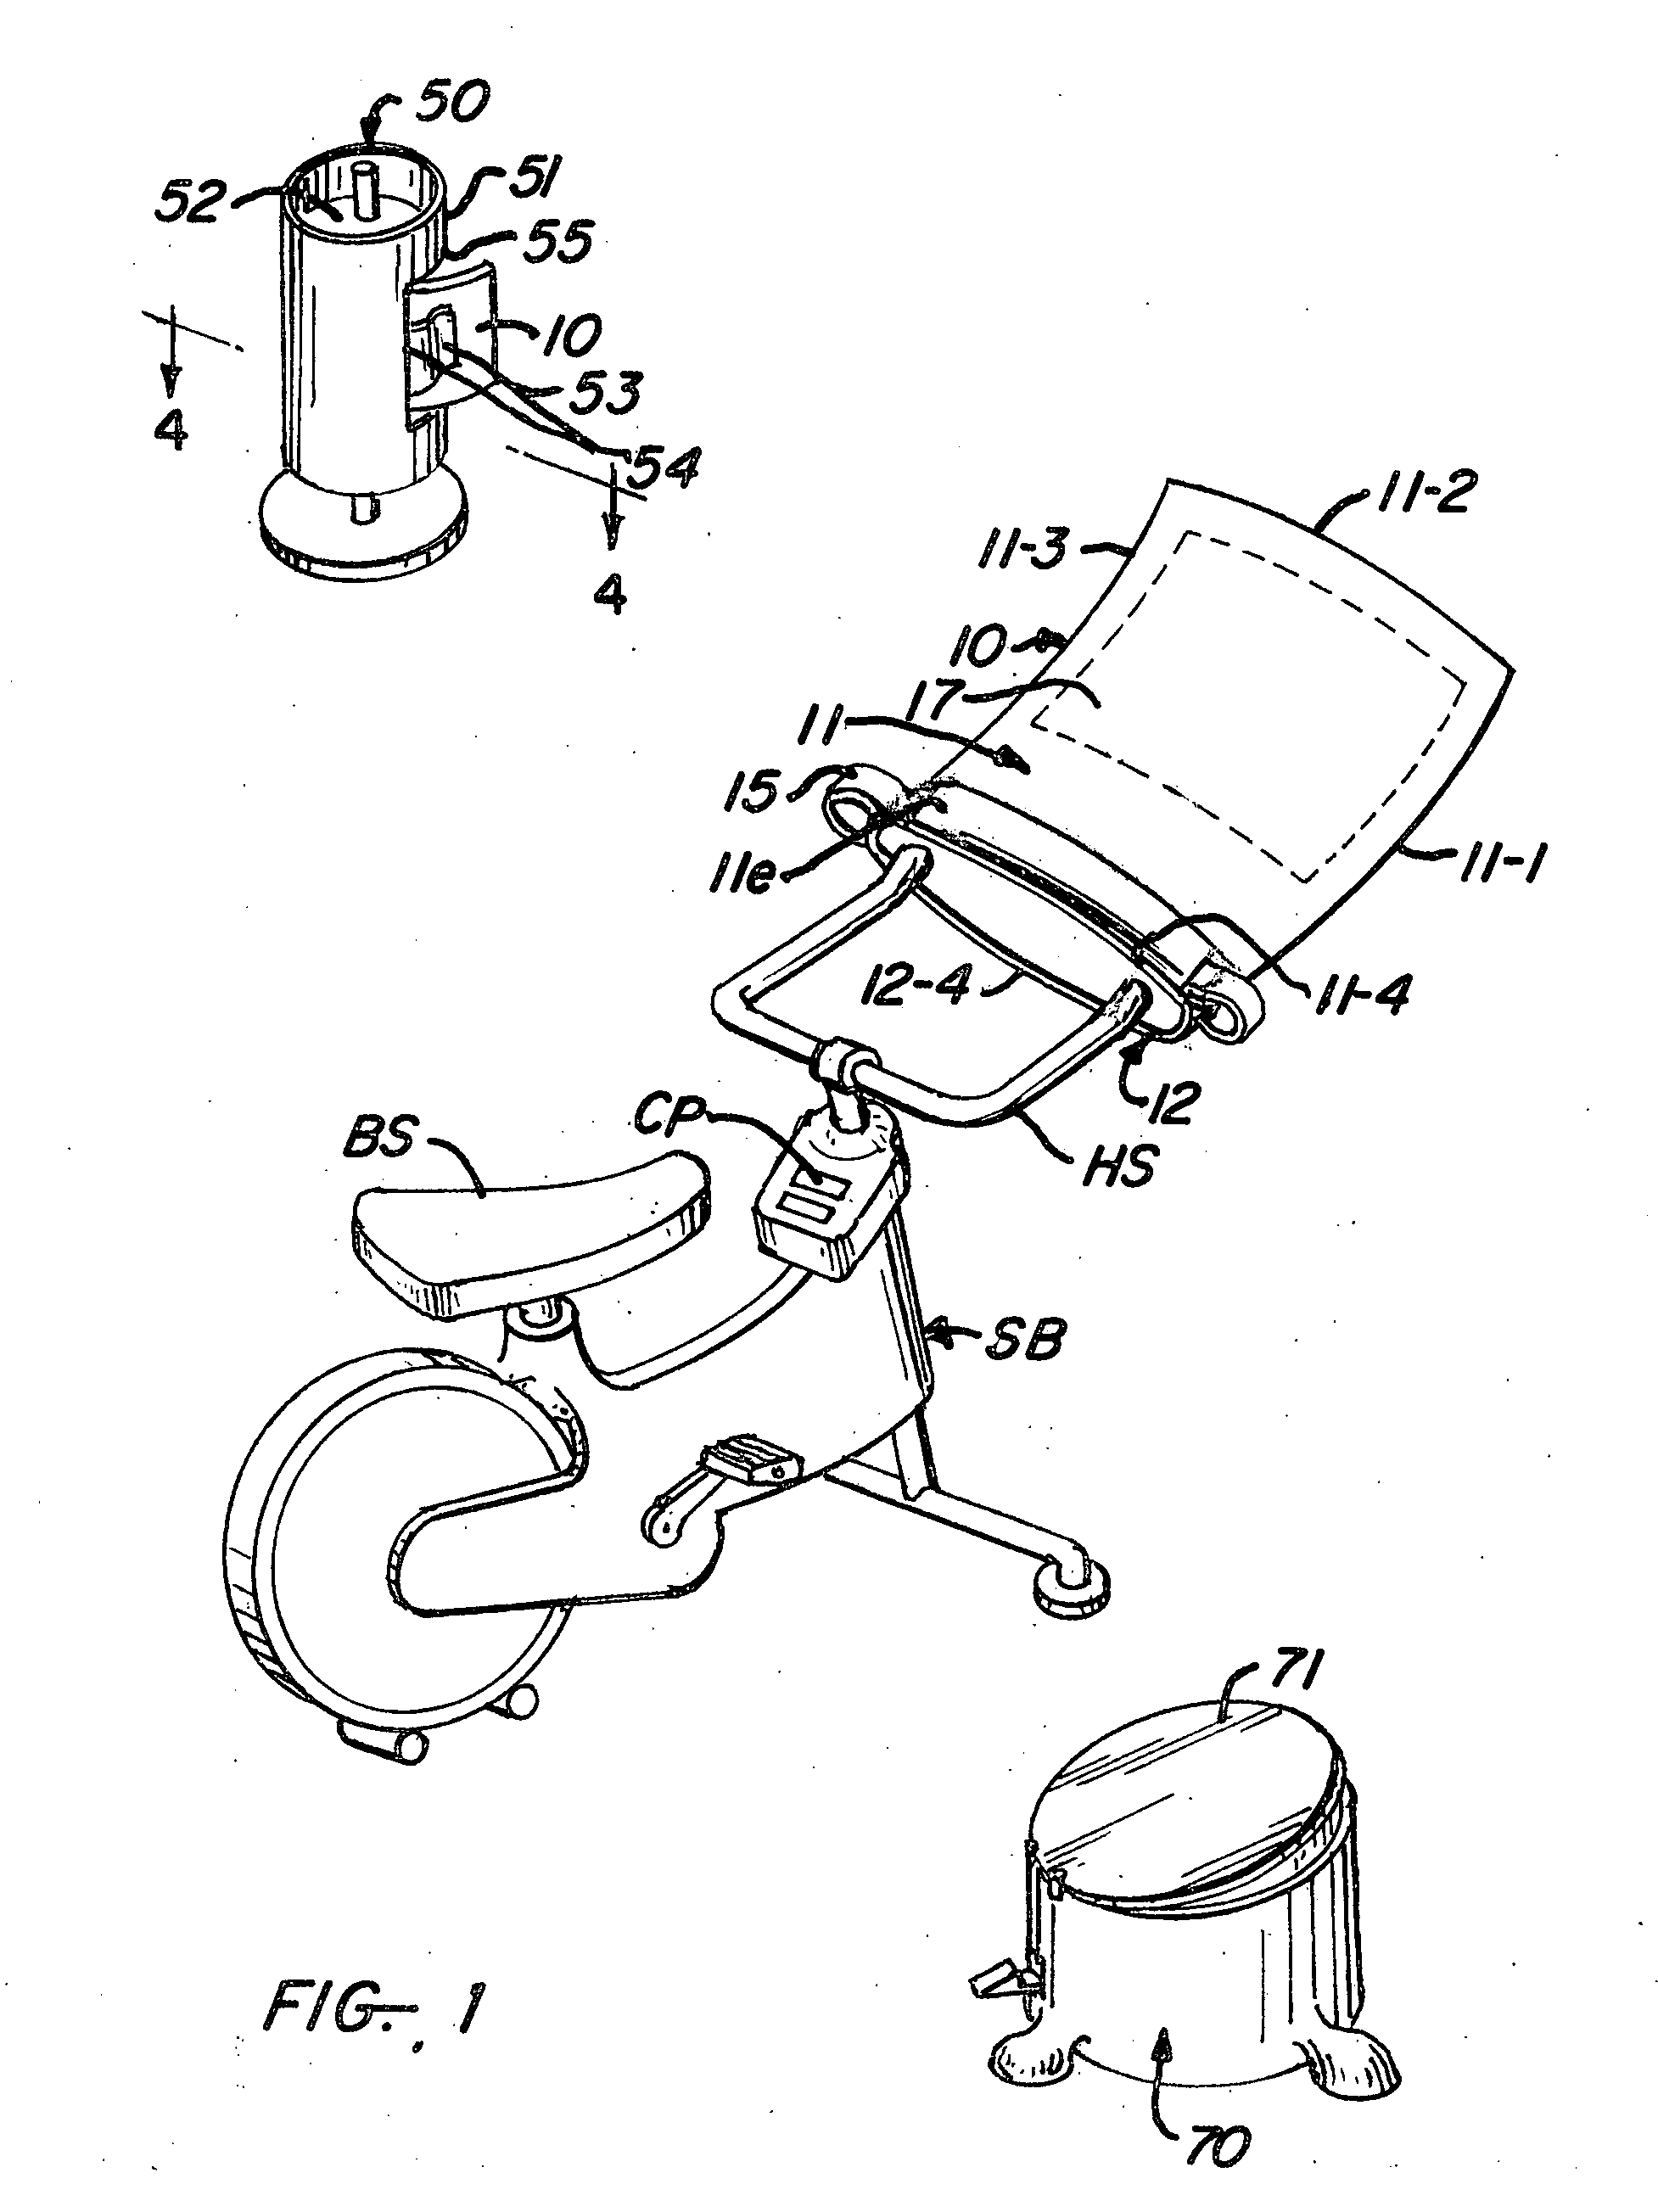 Method and apparatus for providing sanitary shields for exercise devices